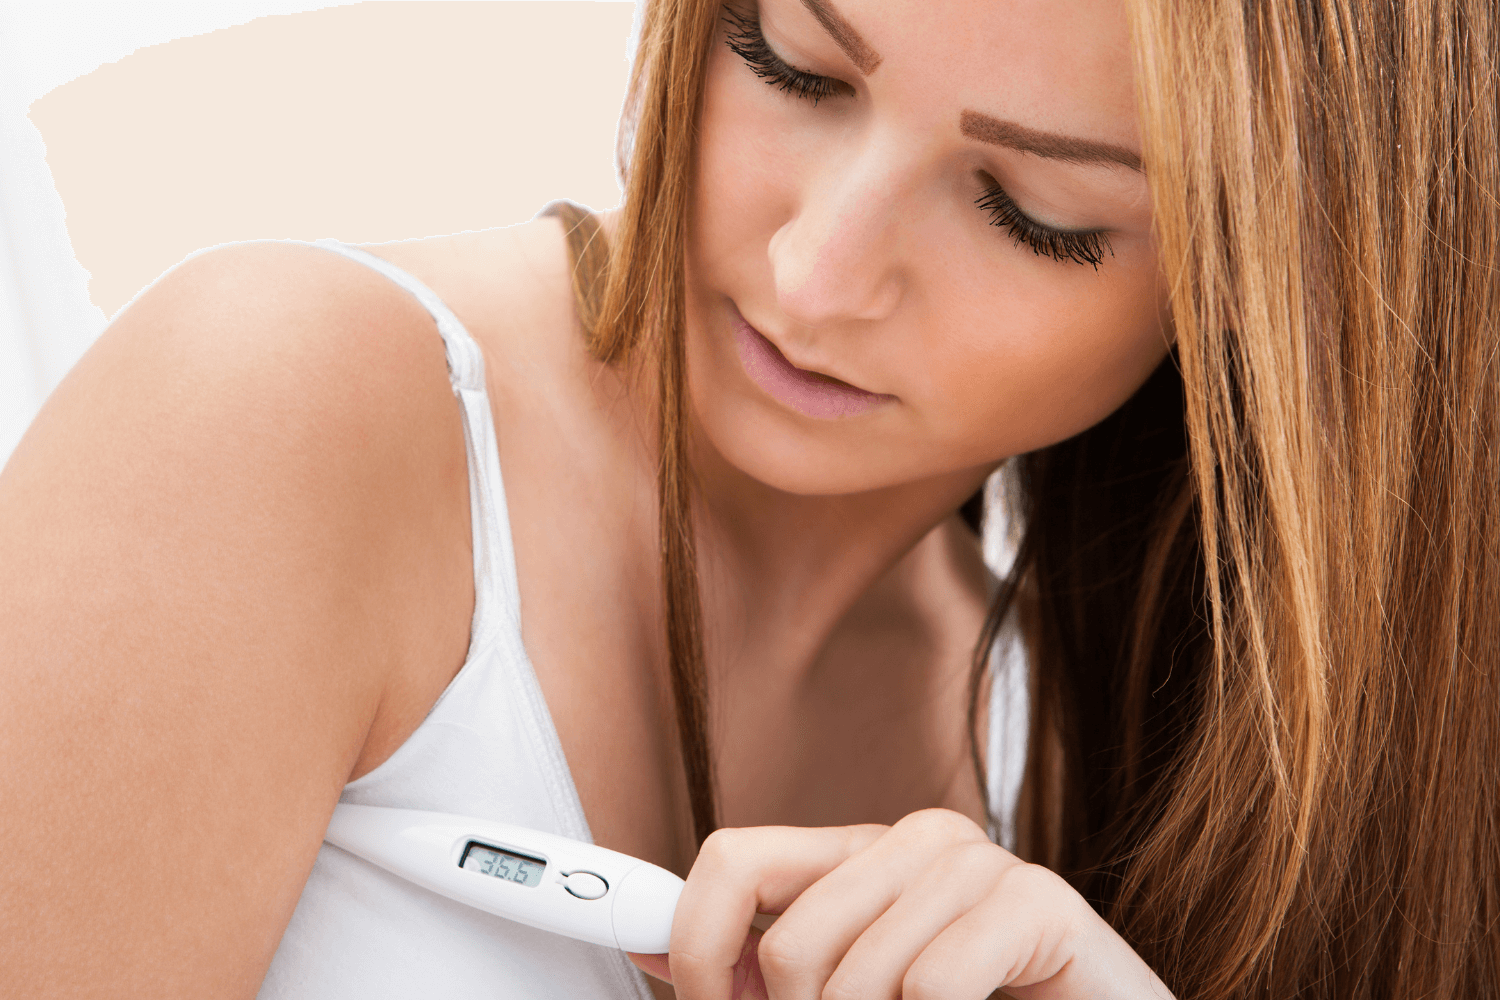 Woman taking her basal body temperature under her armpit using a thermometer